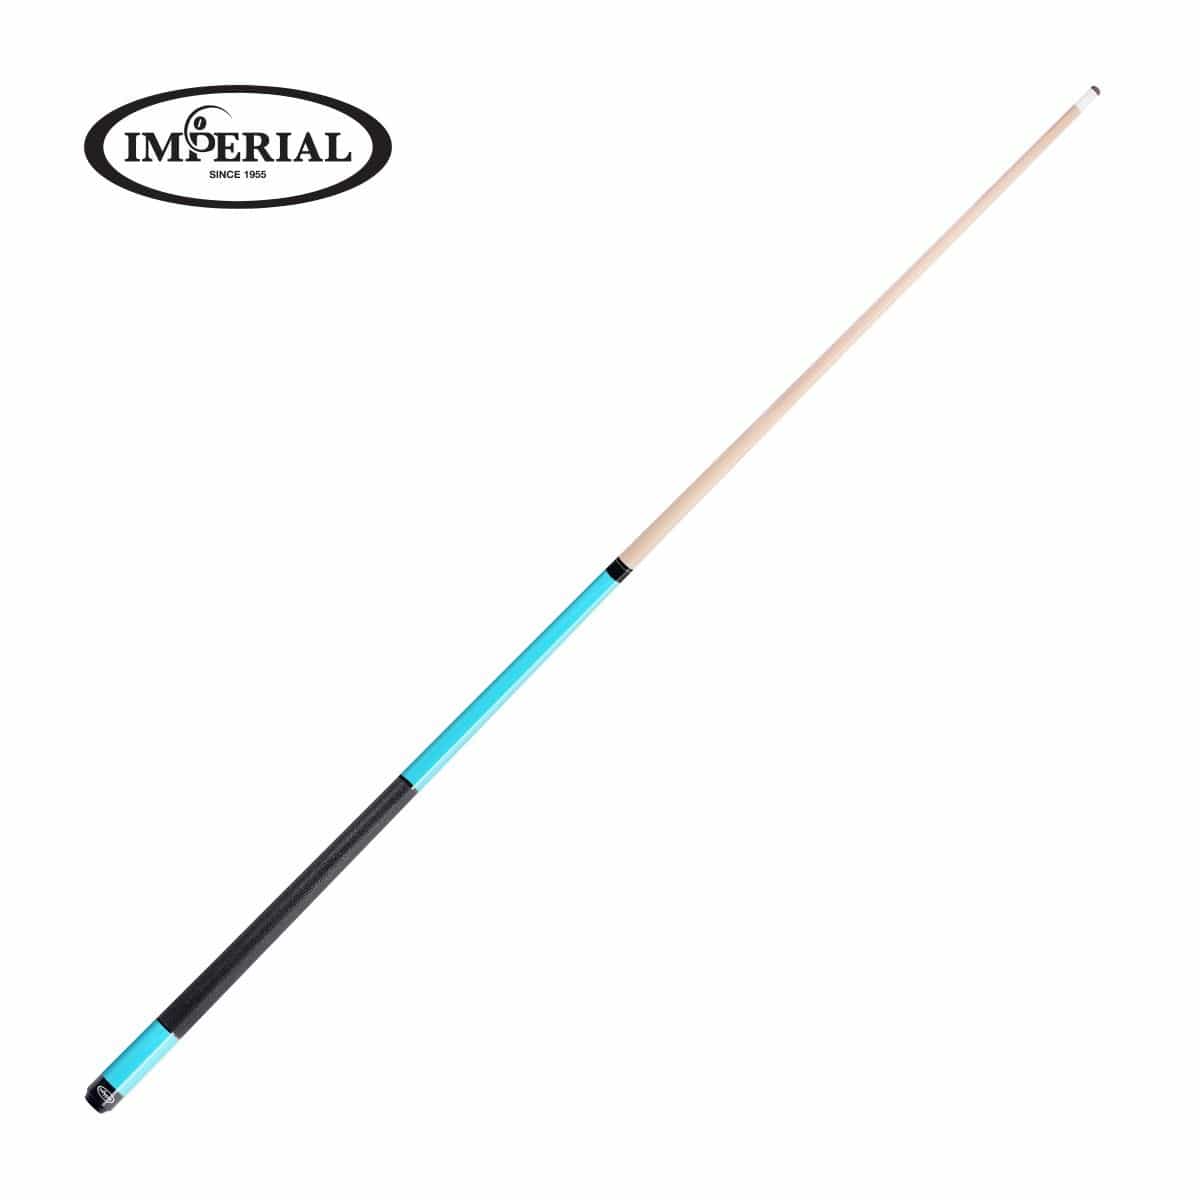 Imperial Billiards Accessories Imperial - Vision Series Mint Cue w/ Wrap* - 13-756-LW